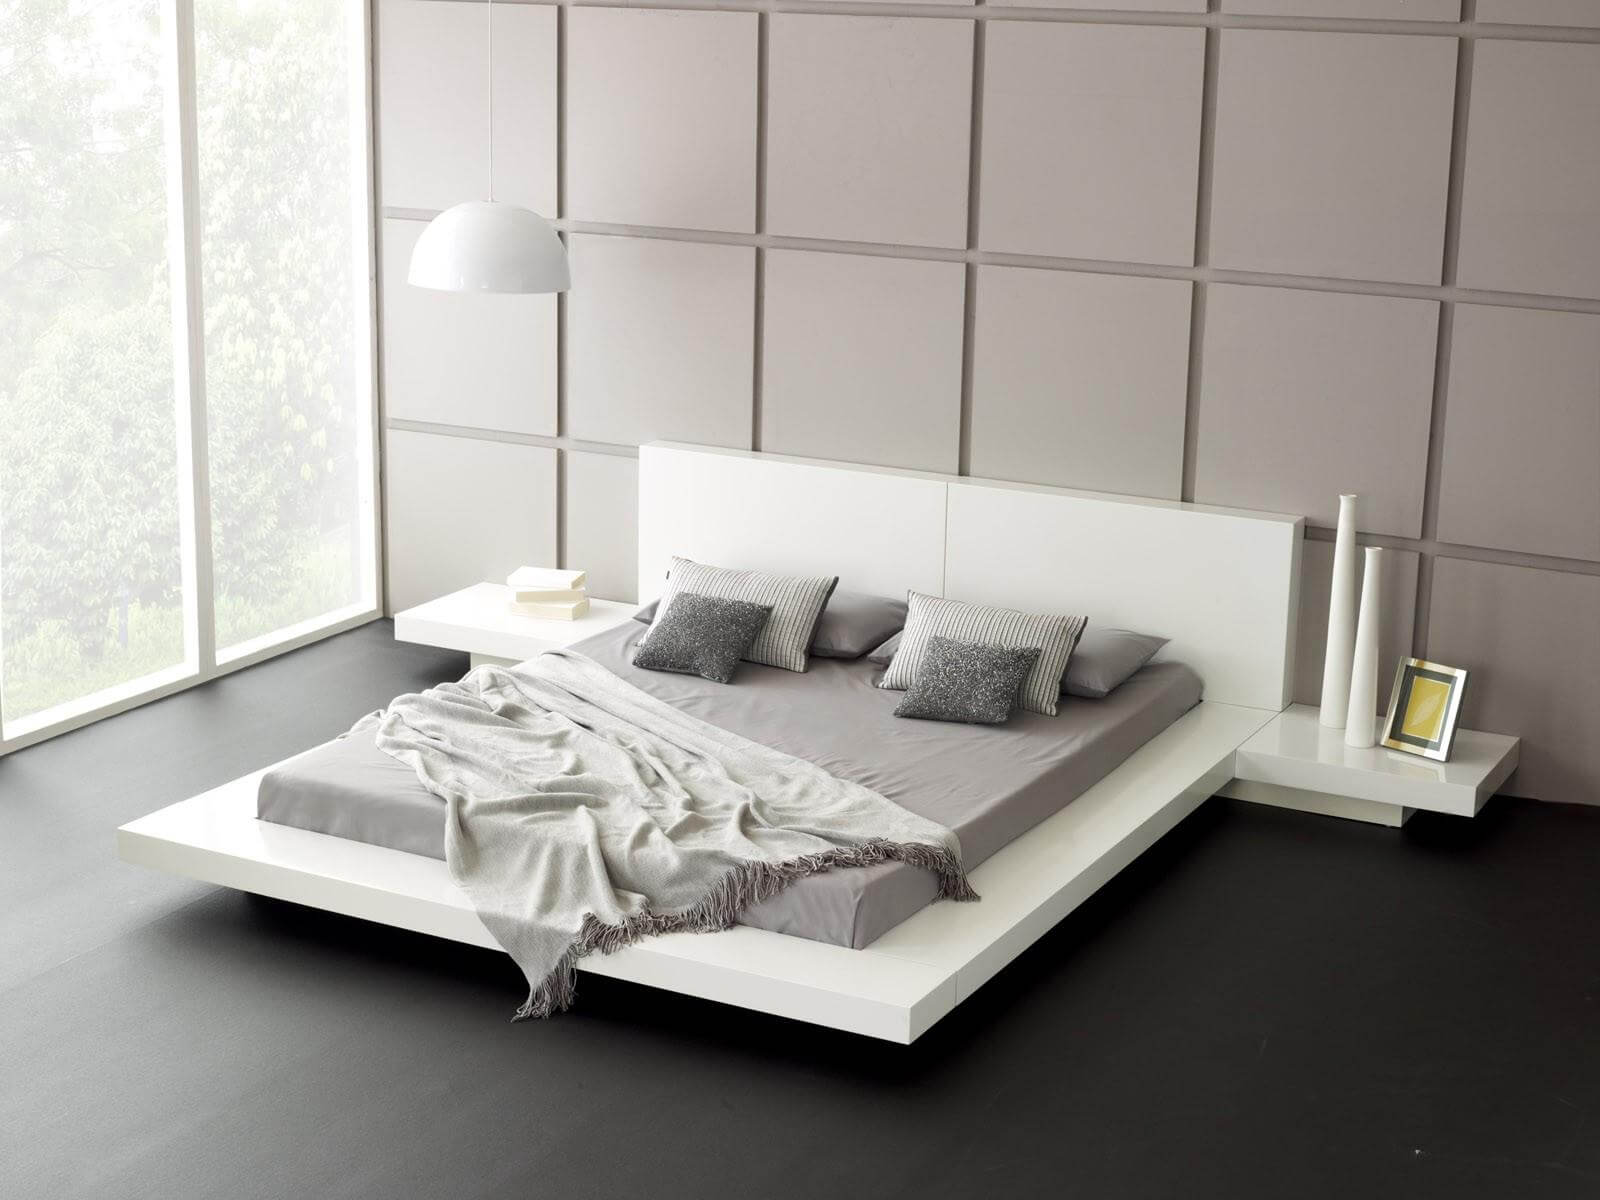 Cool Platform Bed Ideas and Design For Small Room